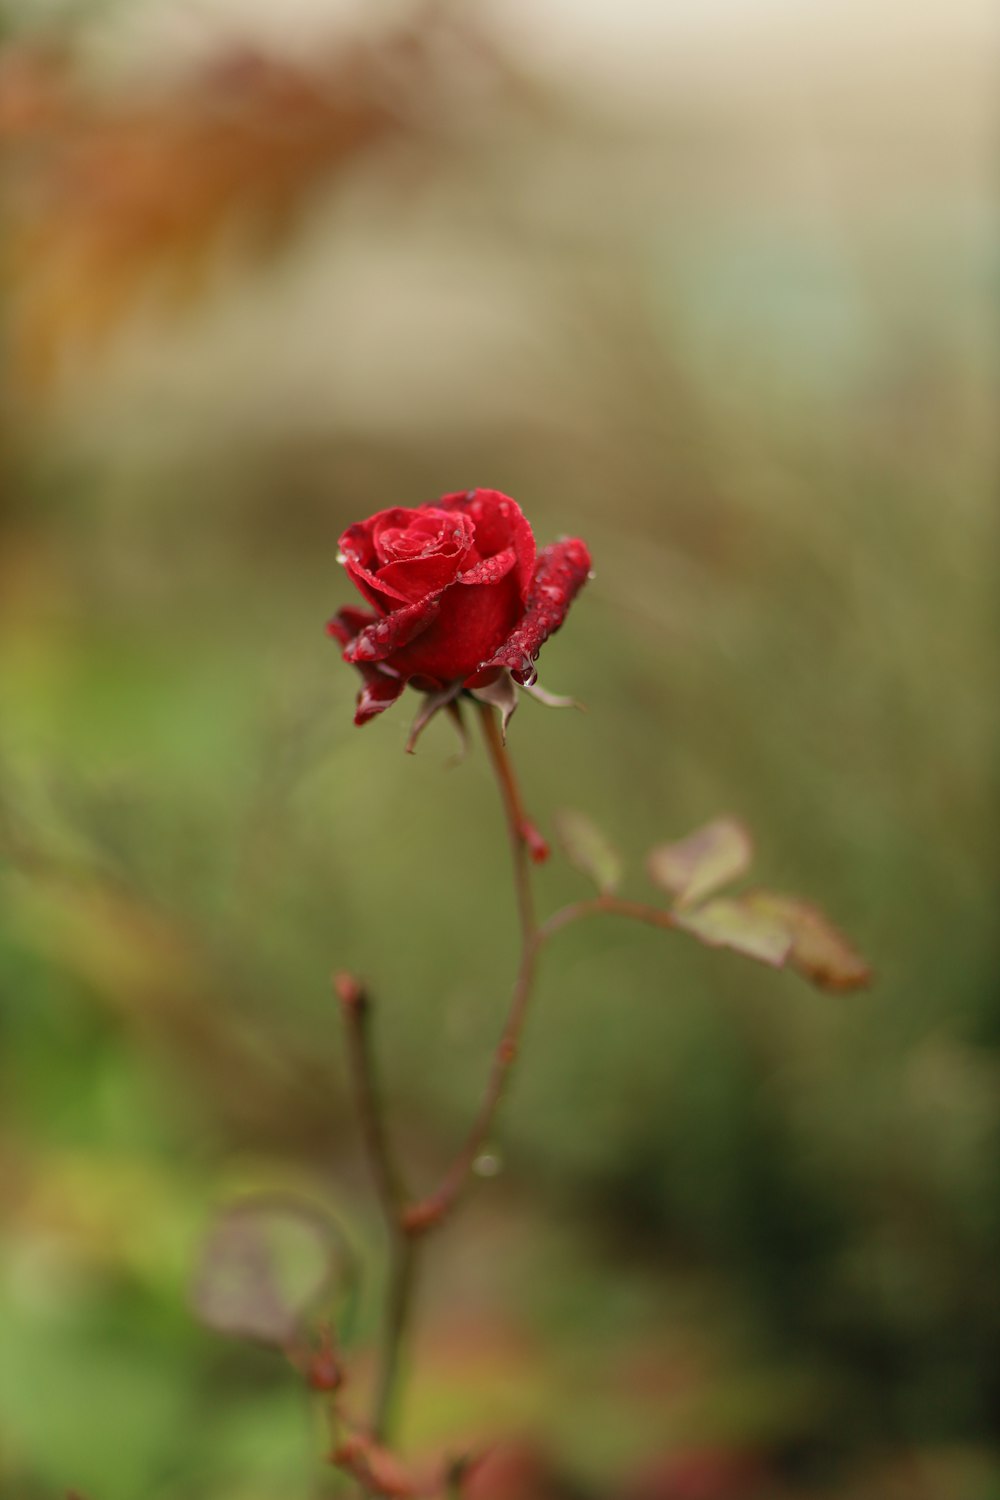 a single red rose with a blurry background